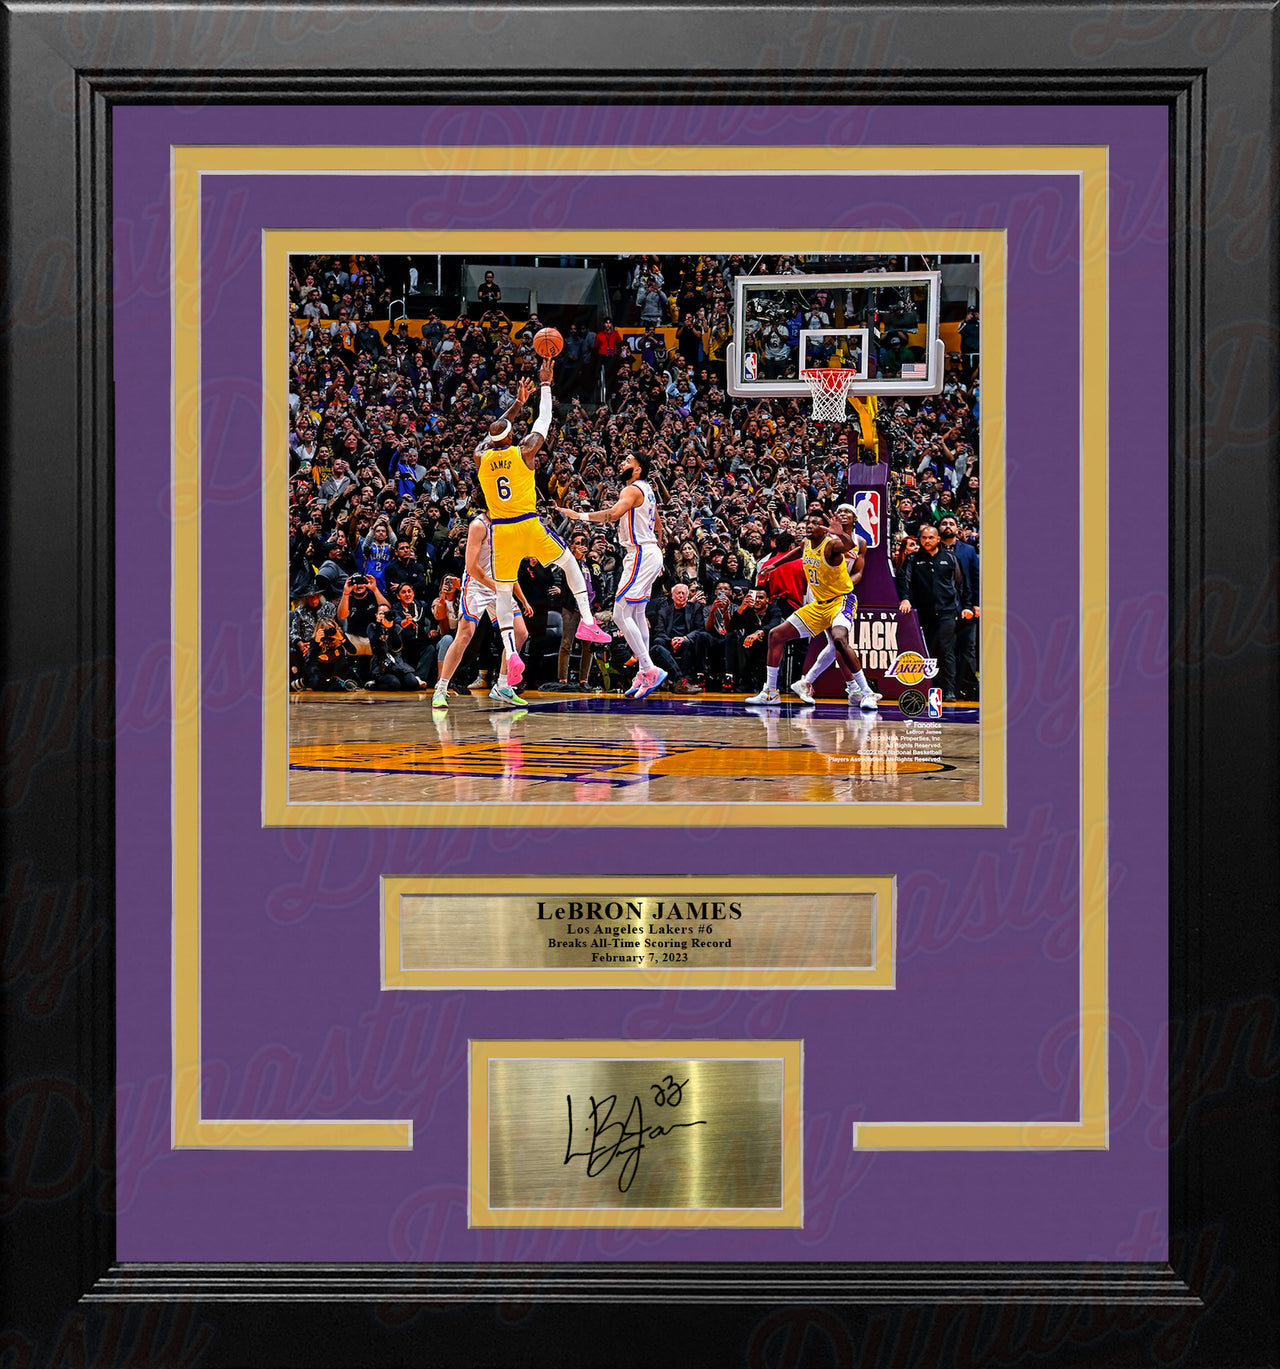 LeBron James Breaks the All-Time Scoring Record LA Lakers 8x10 Framed Photo with Engraved Autograph - Dynasty Sports & Framing 